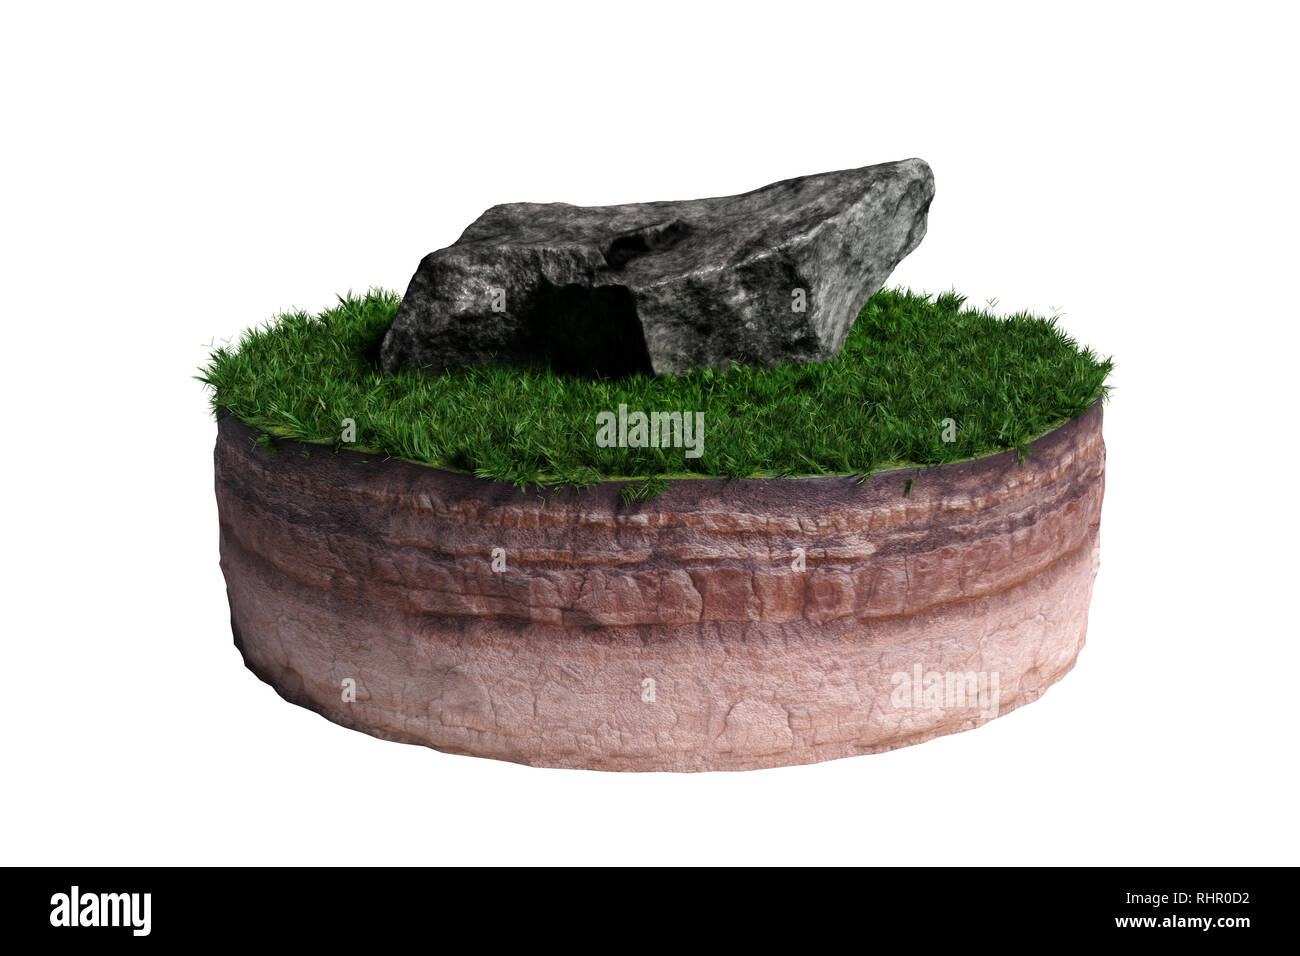 model of a cross section of ground with grass and a huge stone on the surface (3d render, isolated on white background) Stock Photo